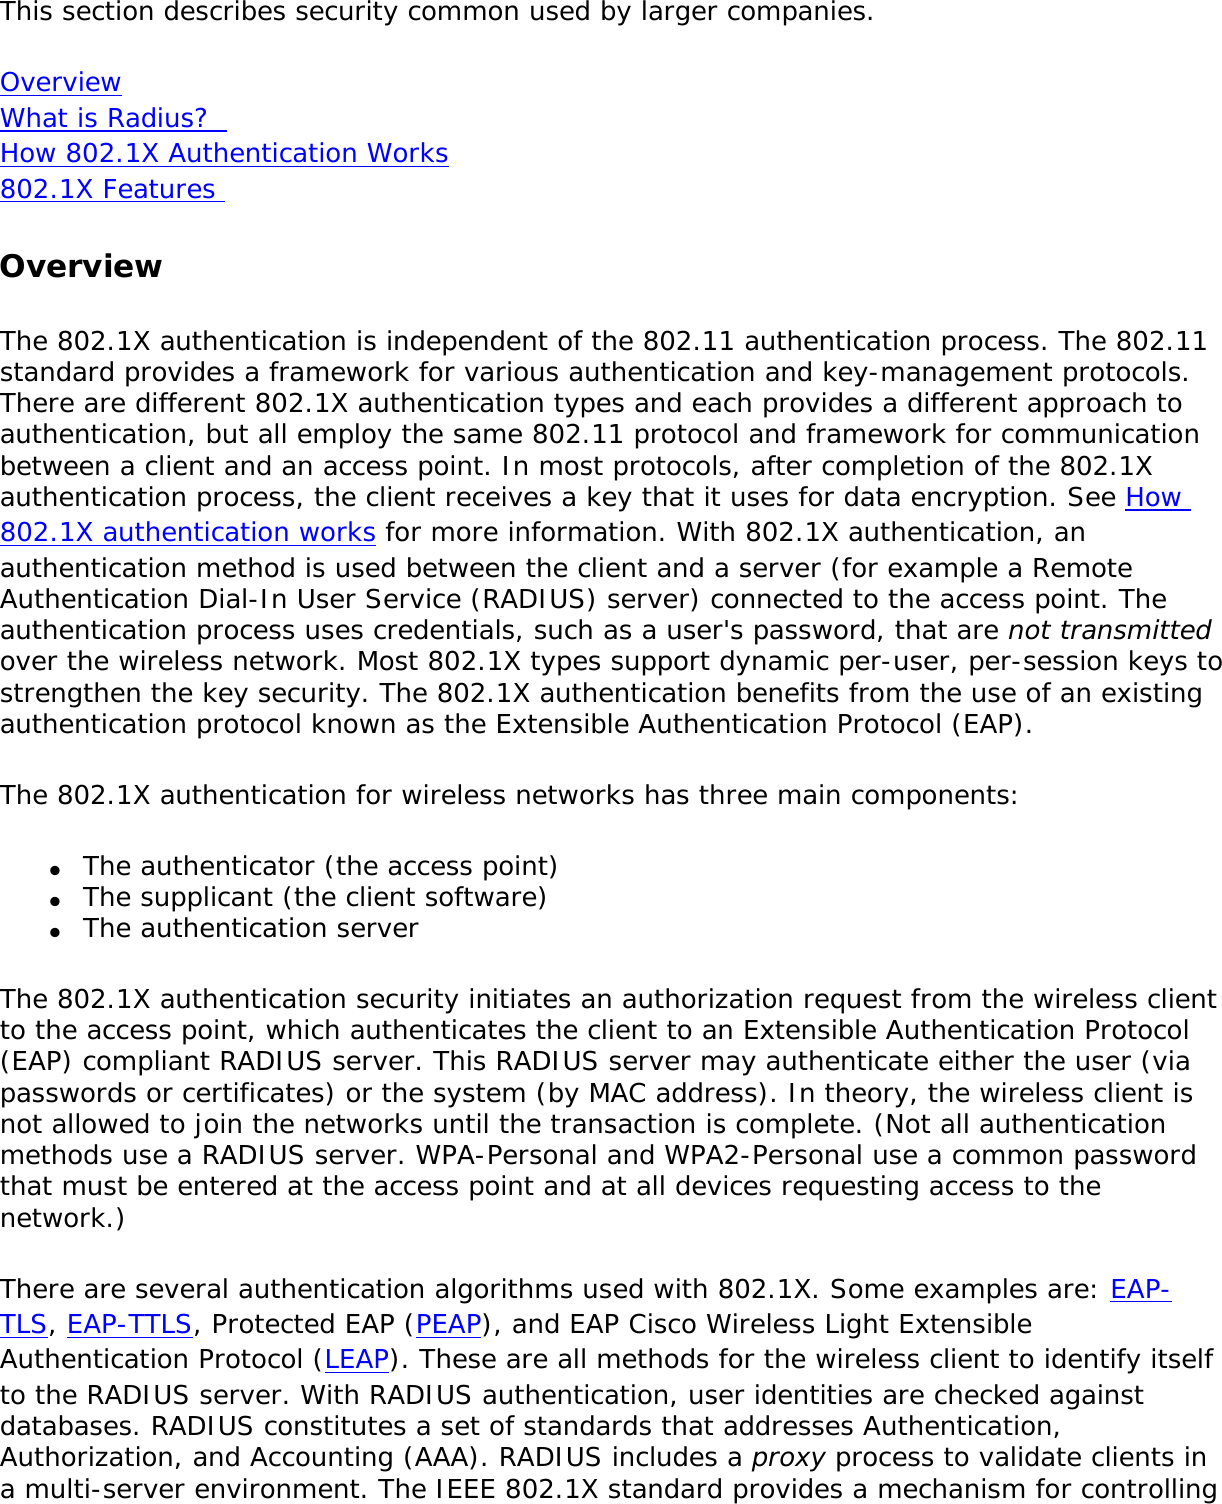 This section describes security common used by larger companies. Overview What is Radius?  How 802.1X Authentication Works 802.1X Features OverviewThe 802.1X authentication is independent of the 802.11 authentication process. The 802.11 standard provides a framework for various authentication and key-management protocols. There are different 802.1X authentication types and each provides a different approach to authentication, but all employ the same 802.11 protocol and framework for communication between a client and an access point. In most protocols, after completion of the 802.1X authentication process, the client receives a key that it uses for data encryption. See How 802.1X authentication works for more information. With 802.1X authentication, an authentication method is used between the client and a server (for example a Remote Authentication Dial-In User Service (RADIUS) server) connected to the access point. The authentication process uses credentials, such as a user&apos;s password, that are not transmitted over the wireless network. Most 802.1X types support dynamic per-user, per-session keys to strengthen the key security. The 802.1X authentication benefits from the use of an existing authentication protocol known as the Extensible Authentication Protocol (EAP).The 802.1X authentication for wireless networks has three main components: ●     The authenticator (the access point)●     The supplicant (the client software)●     The authentication serverThe 802.1X authentication security initiates an authorization request from the wireless client to the access point, which authenticates the client to an Extensible Authentication Protocol (EAP) compliant RADIUS server. This RADIUS server may authenticate either the user (via passwords or certificates) or the system (by MAC address). In theory, the wireless client is not allowed to join the networks until the transaction is complete. (Not all authentication methods use a RADIUS server. WPA-Personal and WPA2-Personal use a common password that must be entered at the access point and at all devices requesting access to the network.)There are several authentication algorithms used with 802.1X. Some examples are: EAP-TLS, EAP-TTLS, Protected EAP (PEAP), and EAP Cisco Wireless Light Extensible Authentication Protocol (LEAP). These are all methods for the wireless client to identify itself to the RADIUS server. With RADIUS authentication, user identities are checked against databases. RADIUS constitutes a set of standards that addresses Authentication, Authorization, and Accounting (AAA). RADIUS includes a proxy process to validate clients in a multi-server environment. The IEEE 802.1X standard provides a mechanism for controlling 